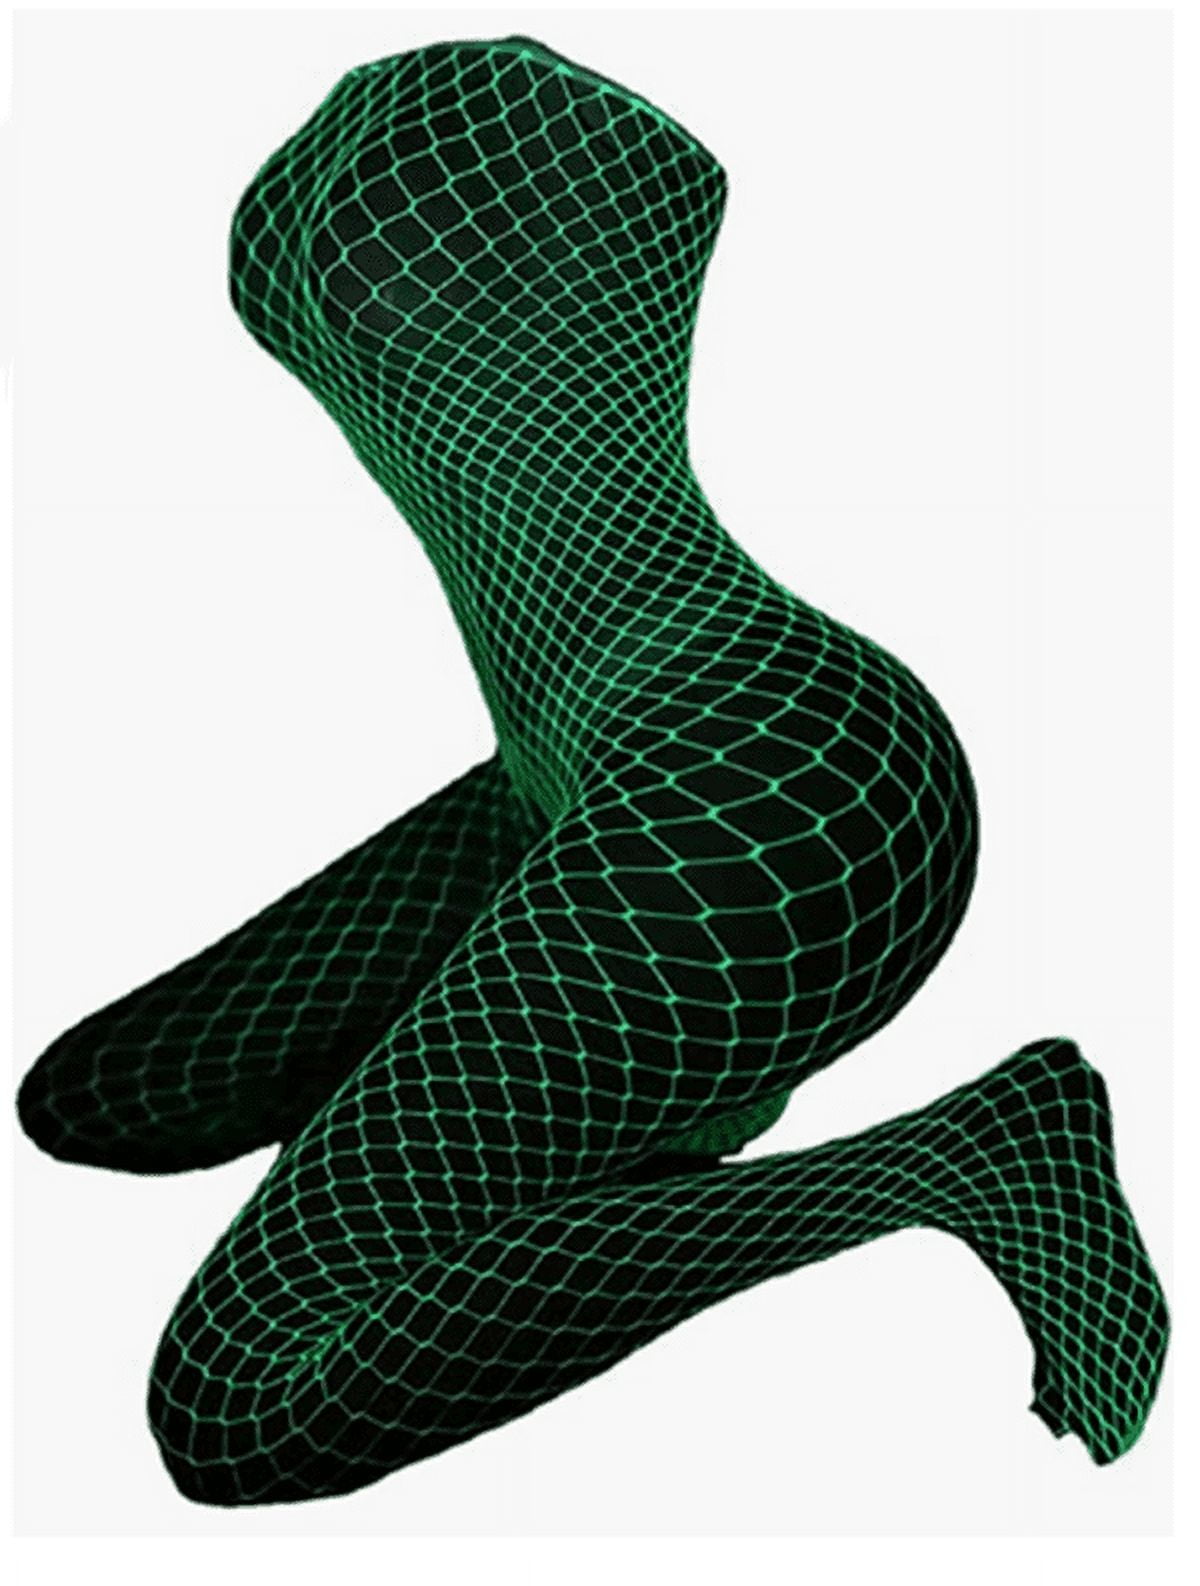 Glow in the Dark Fishnet Stockings,Women Sexy Fishnet Tights Thigh High  Stocking 